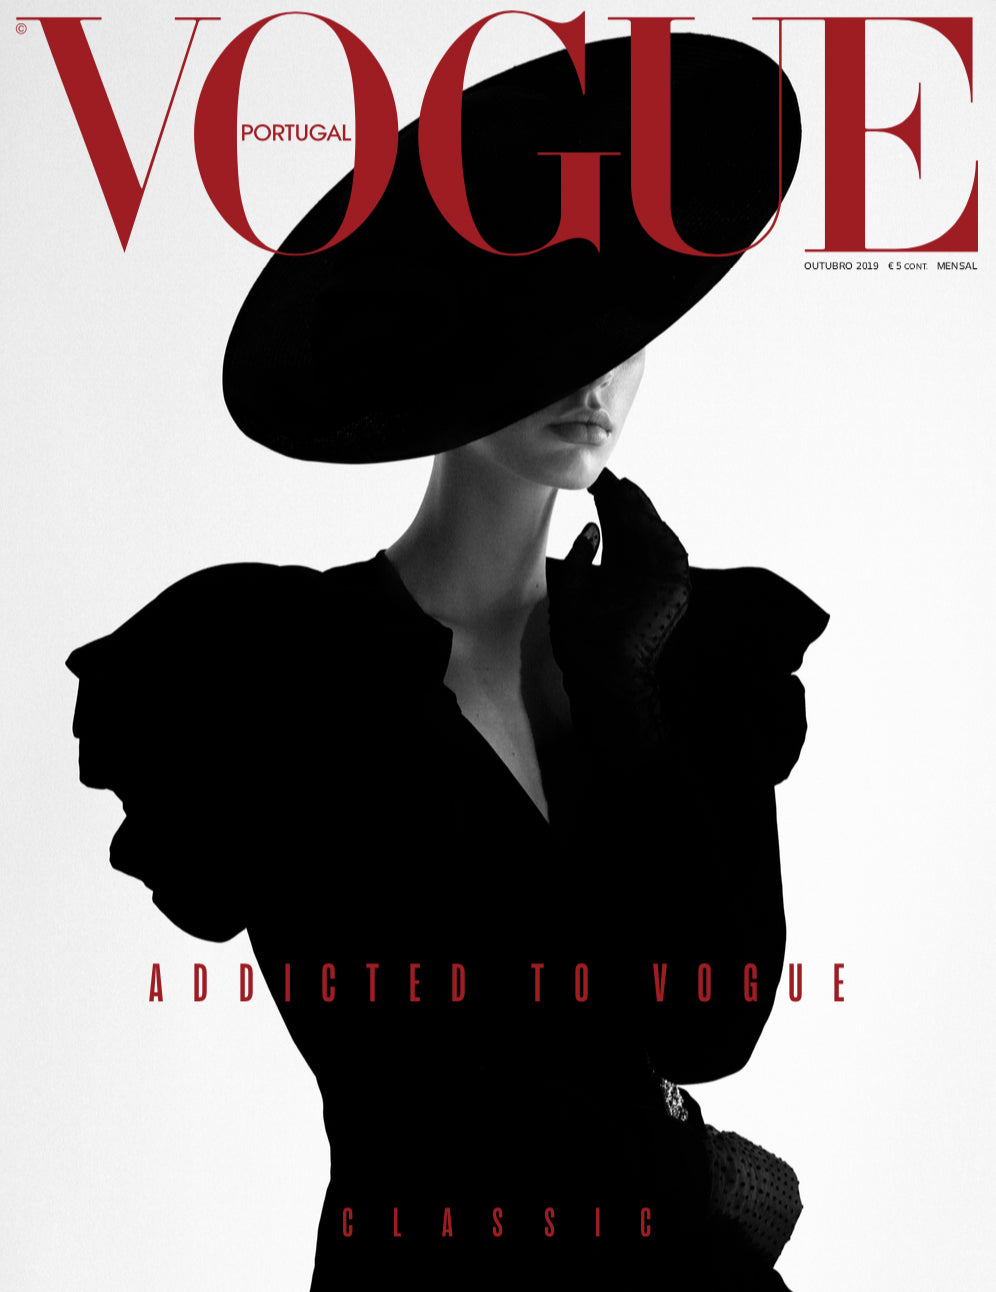 Addicted to Vogue - Cover 2